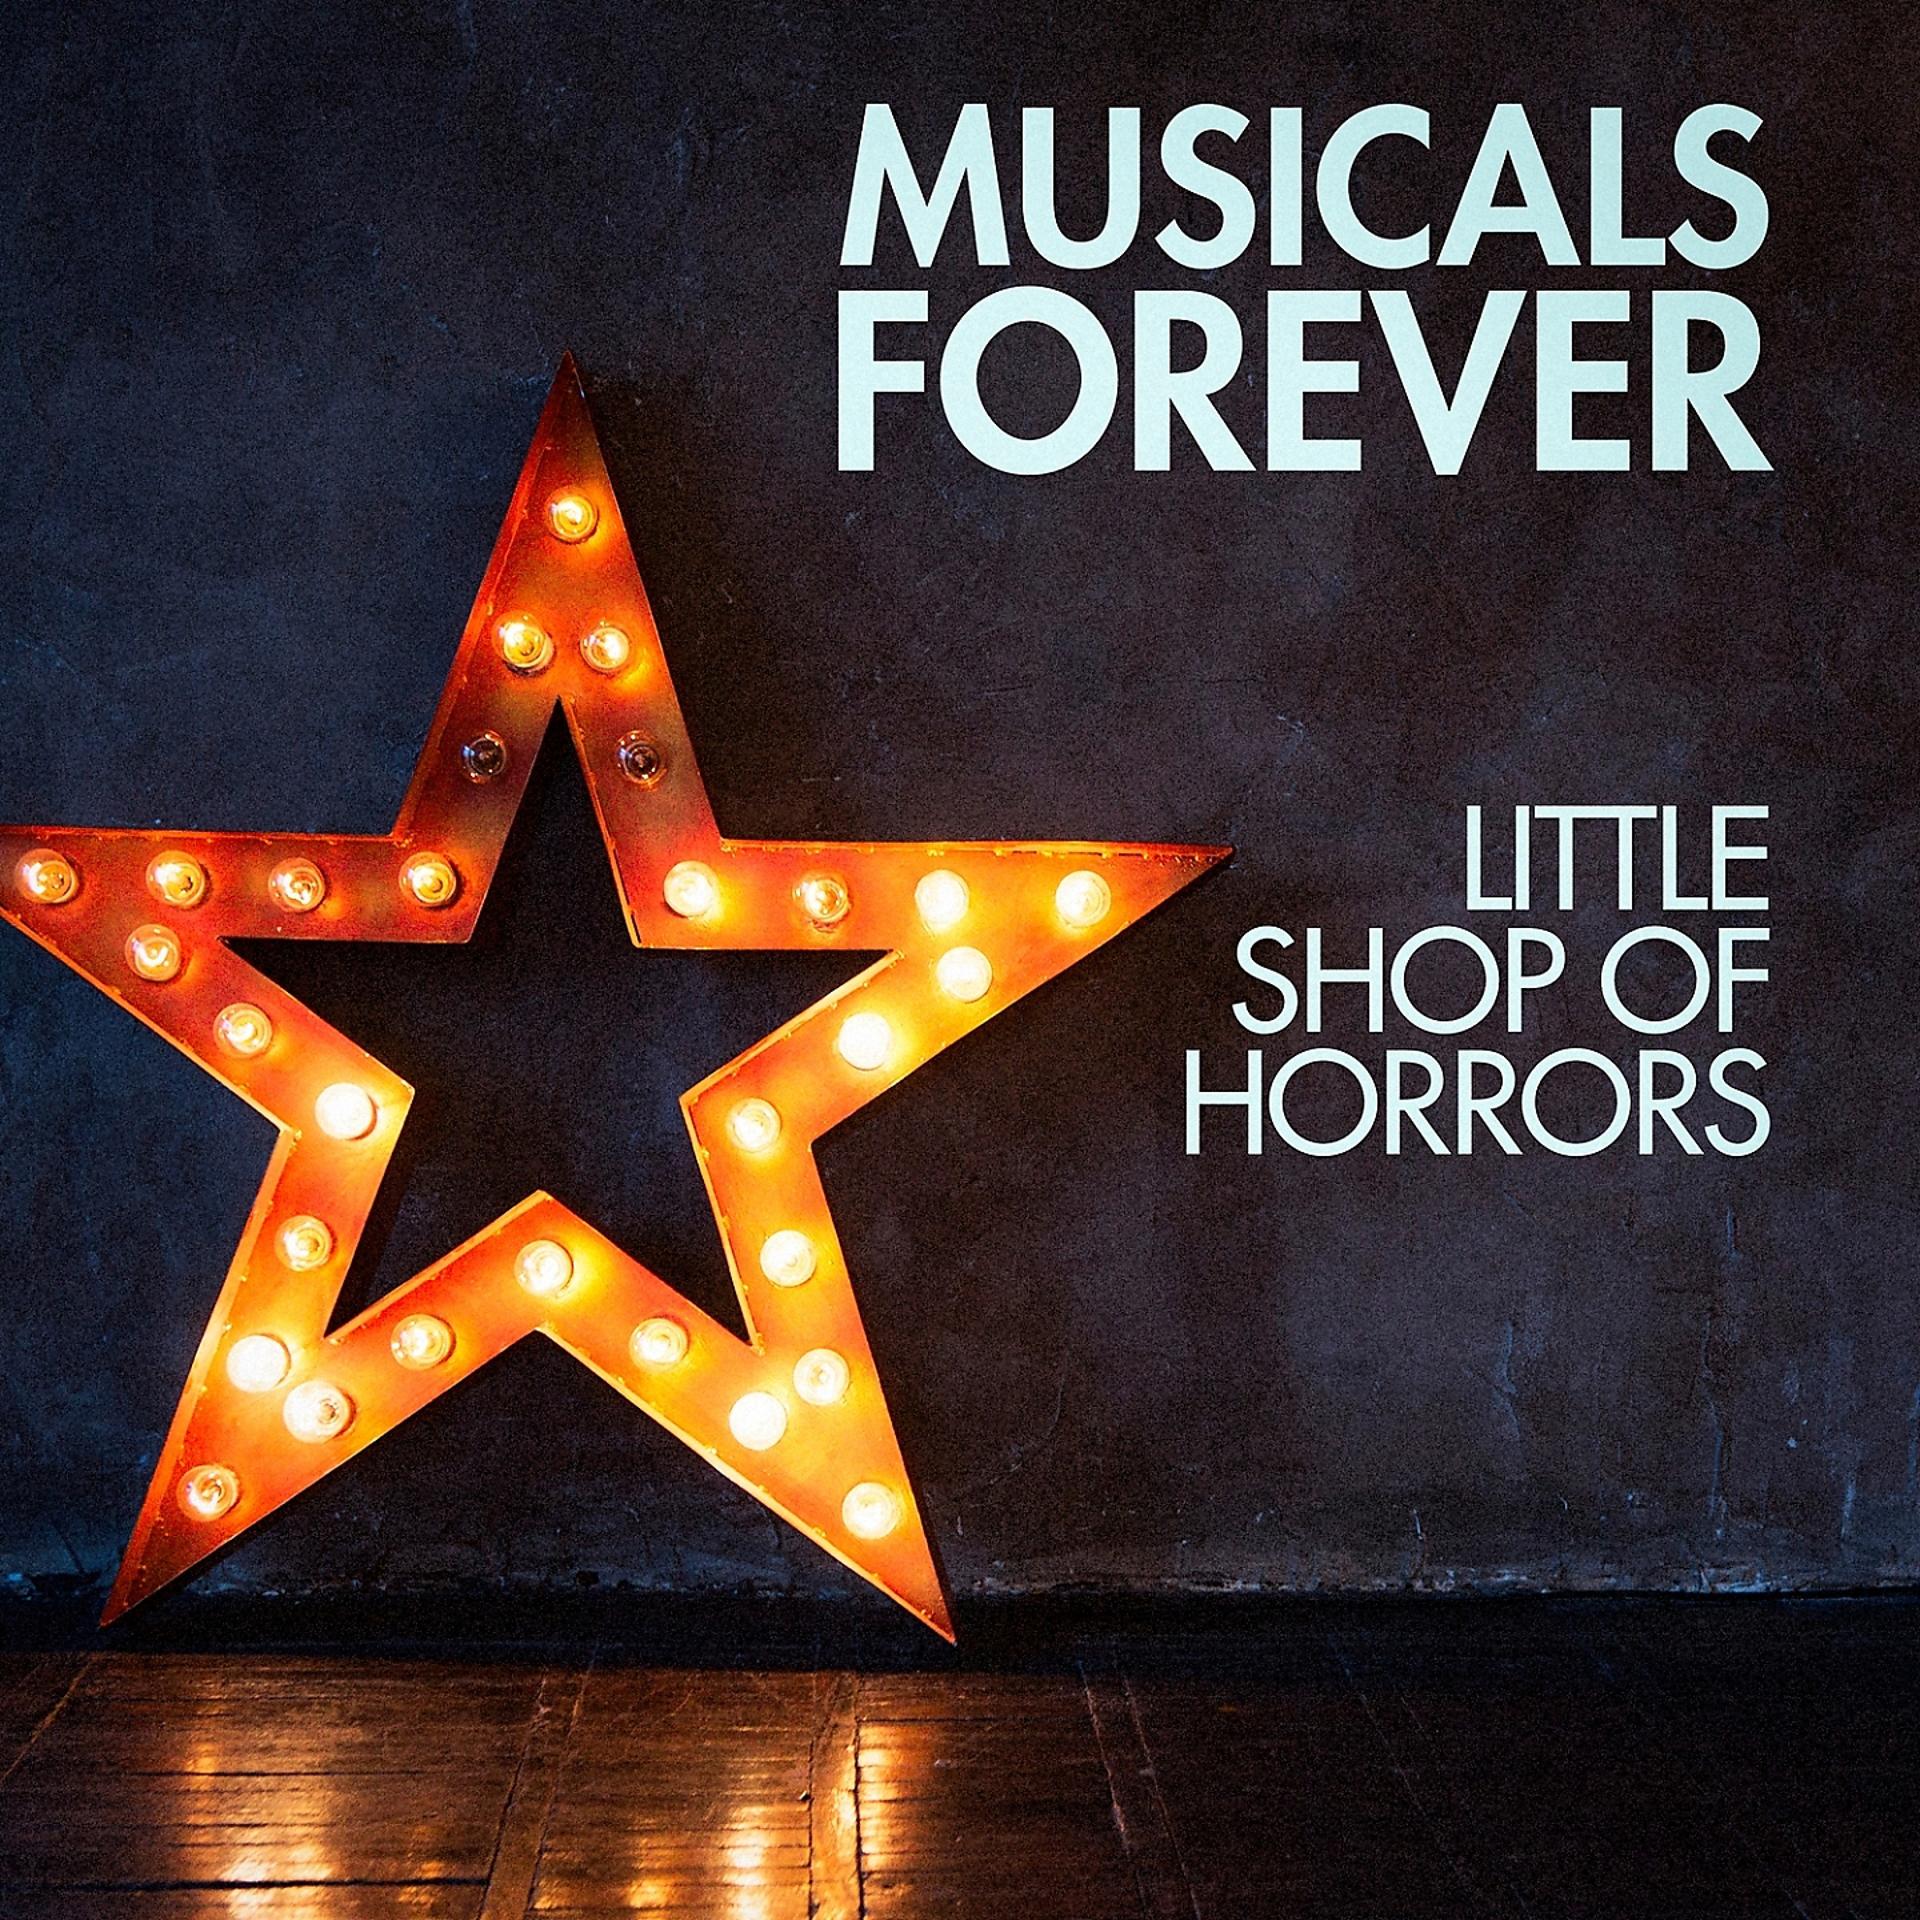 Top music album. Hollywood Musicals. Hollywood Musicals Music Forever: Soundtrack. Warner Music Entertainment Hollywood Musicals Music Forever: Soundtrack.